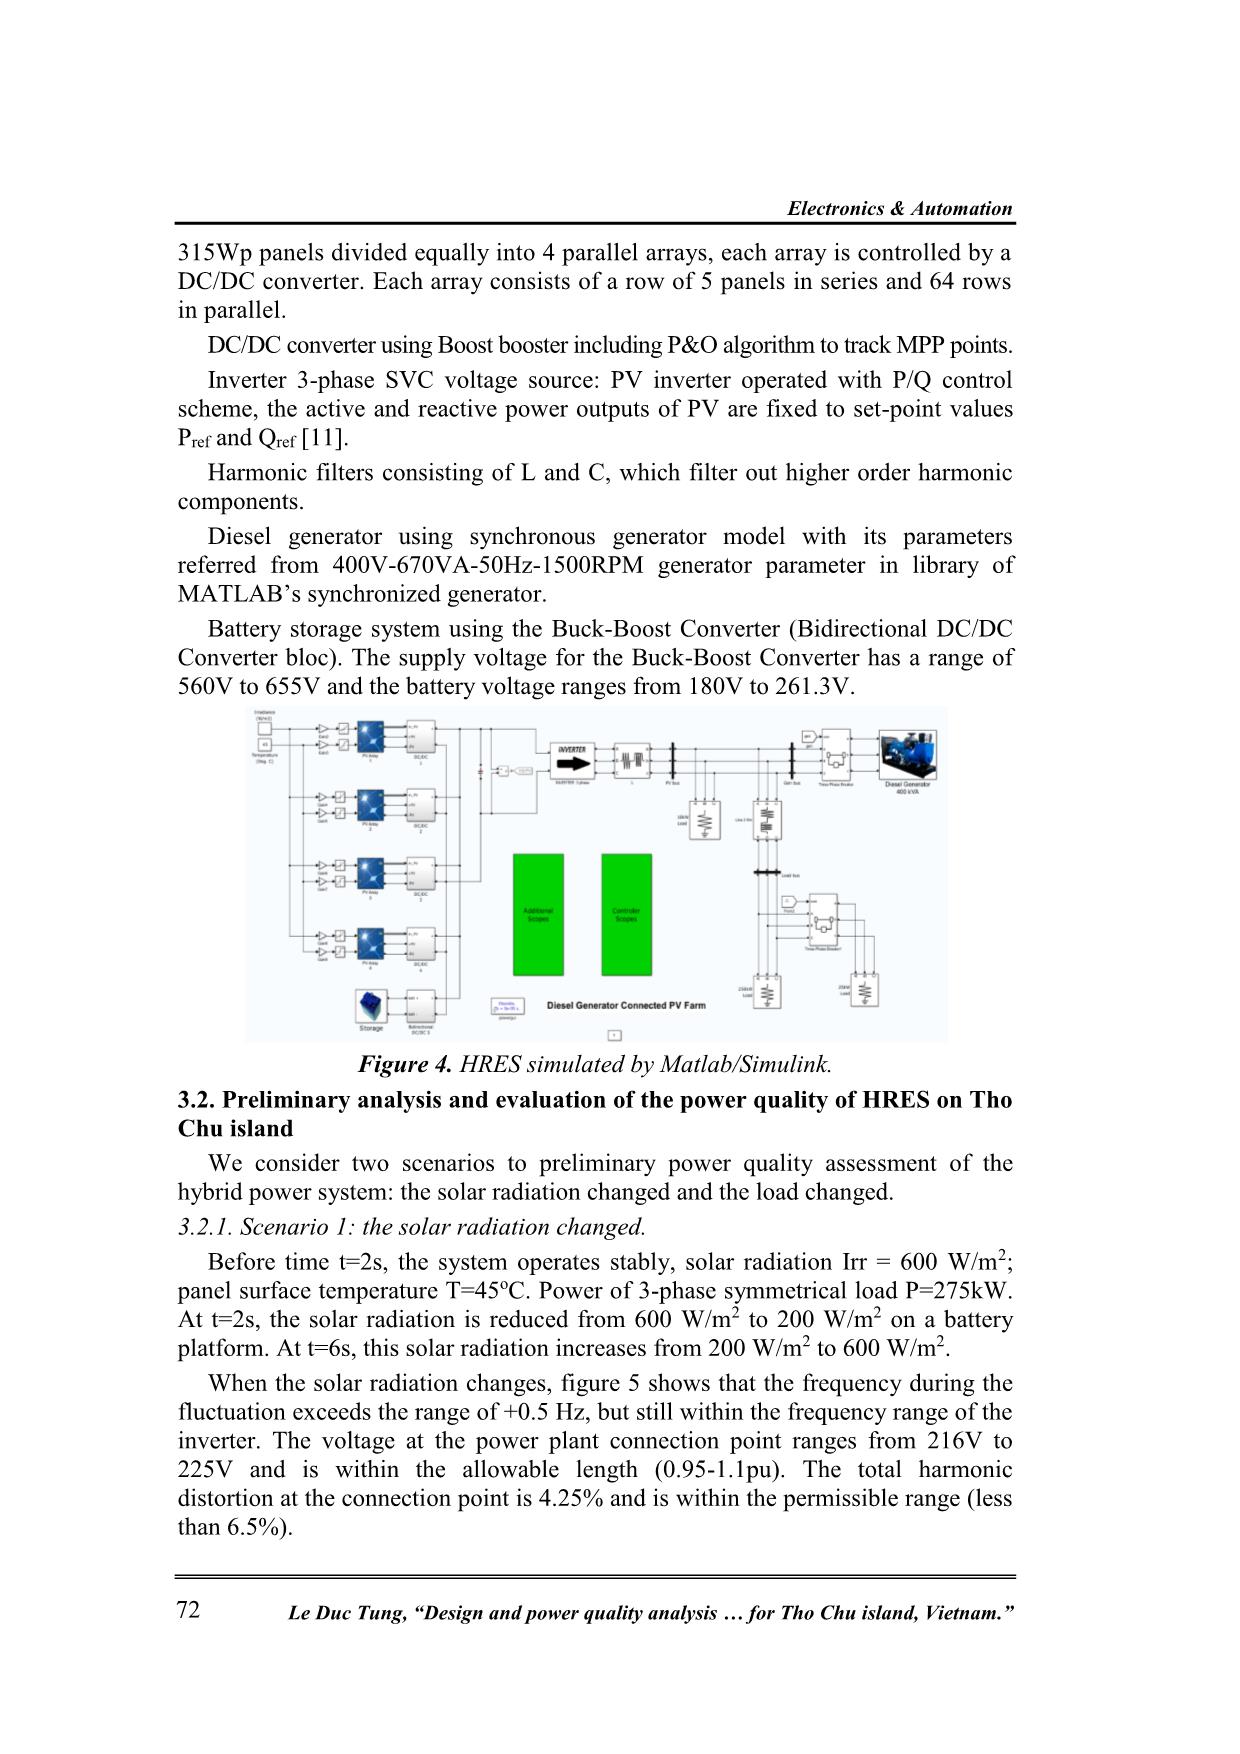 Design and power quality analysis of hybrid renewable energy system for Tho Chu island, Viet Nam trang 7